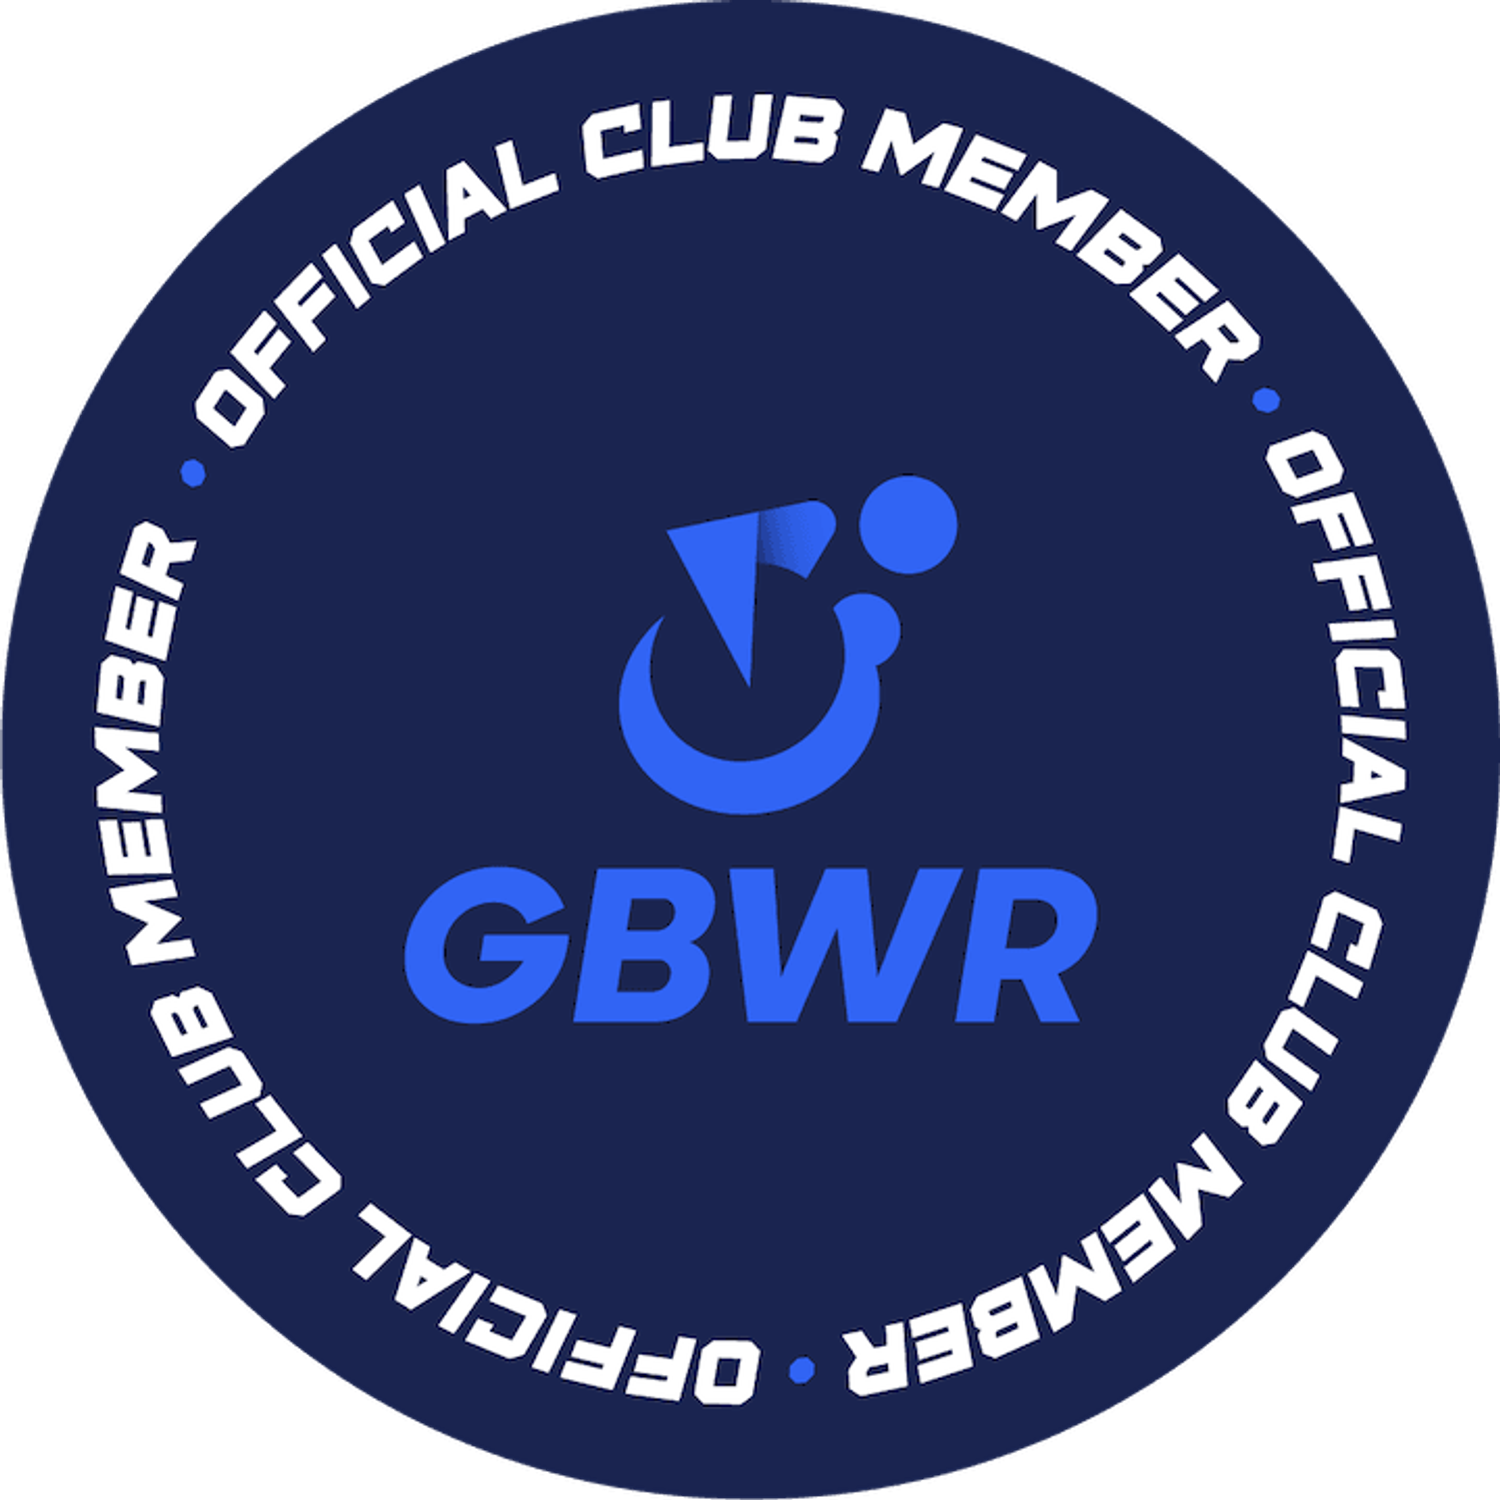 GBWR Official Club Member